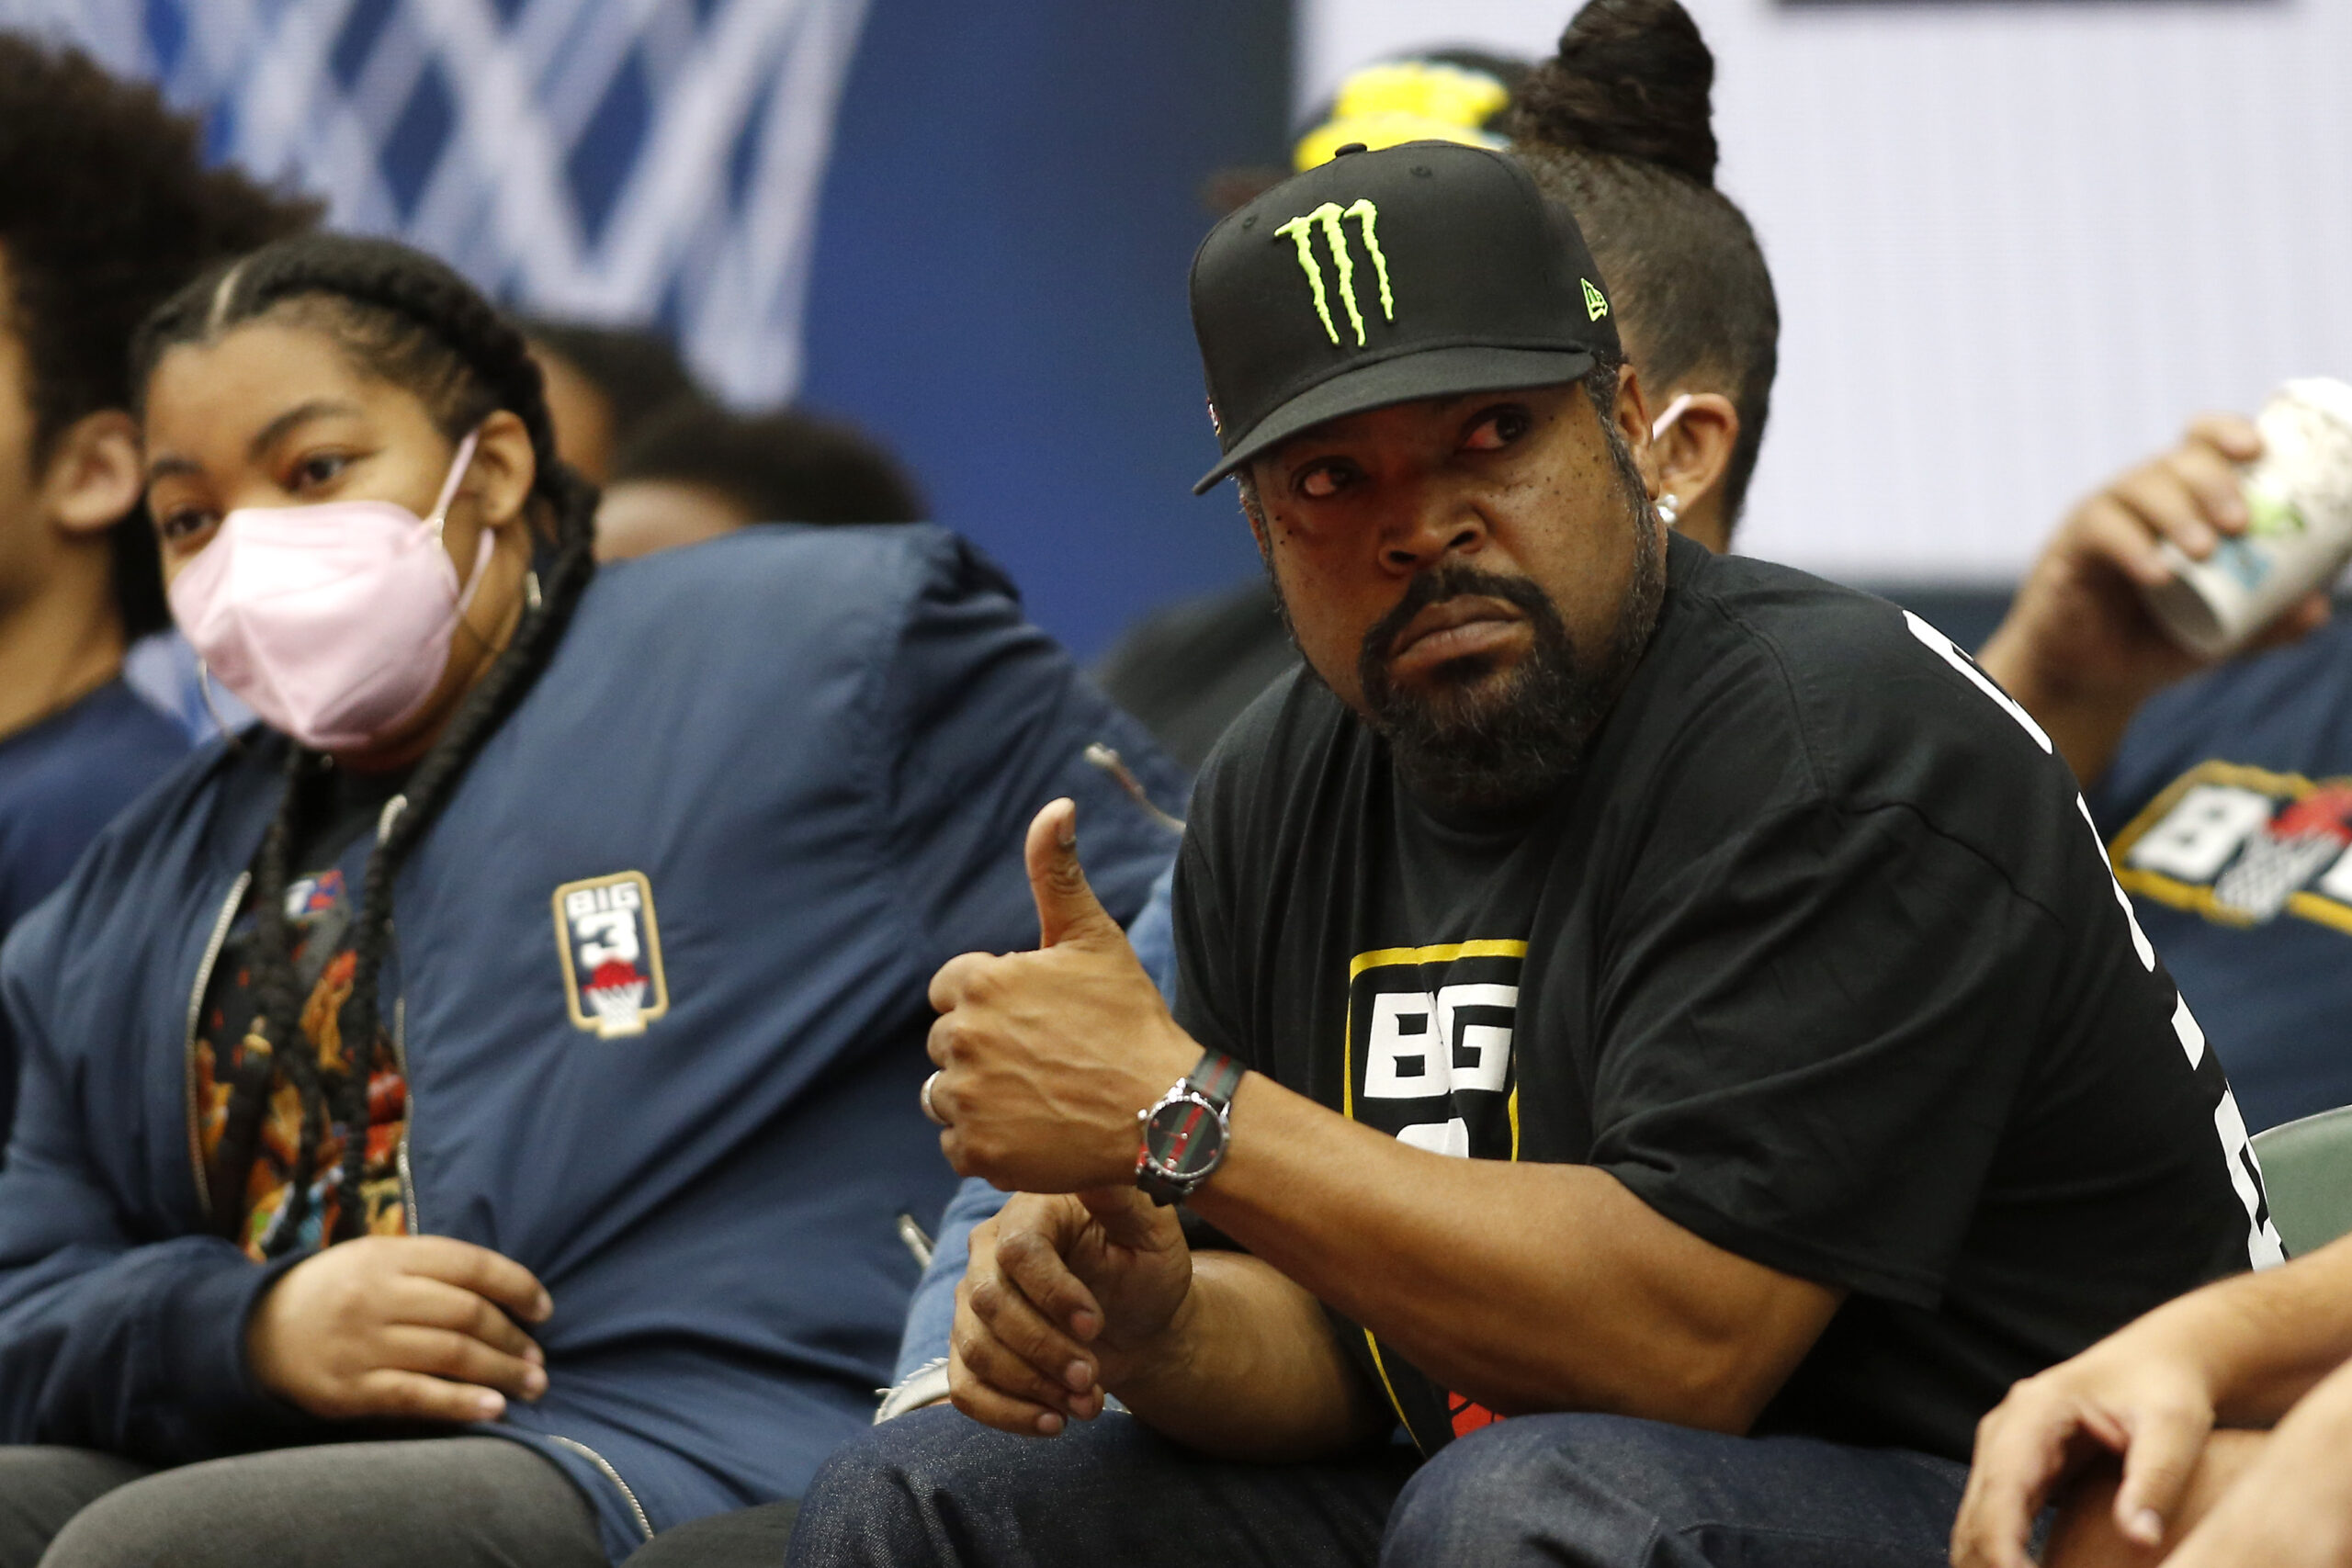 Ice Cube is selling off the first Big3 team to private ownership for $10M. HE plans to sell all the teams and get them permanent homes in high profile cities like LA.